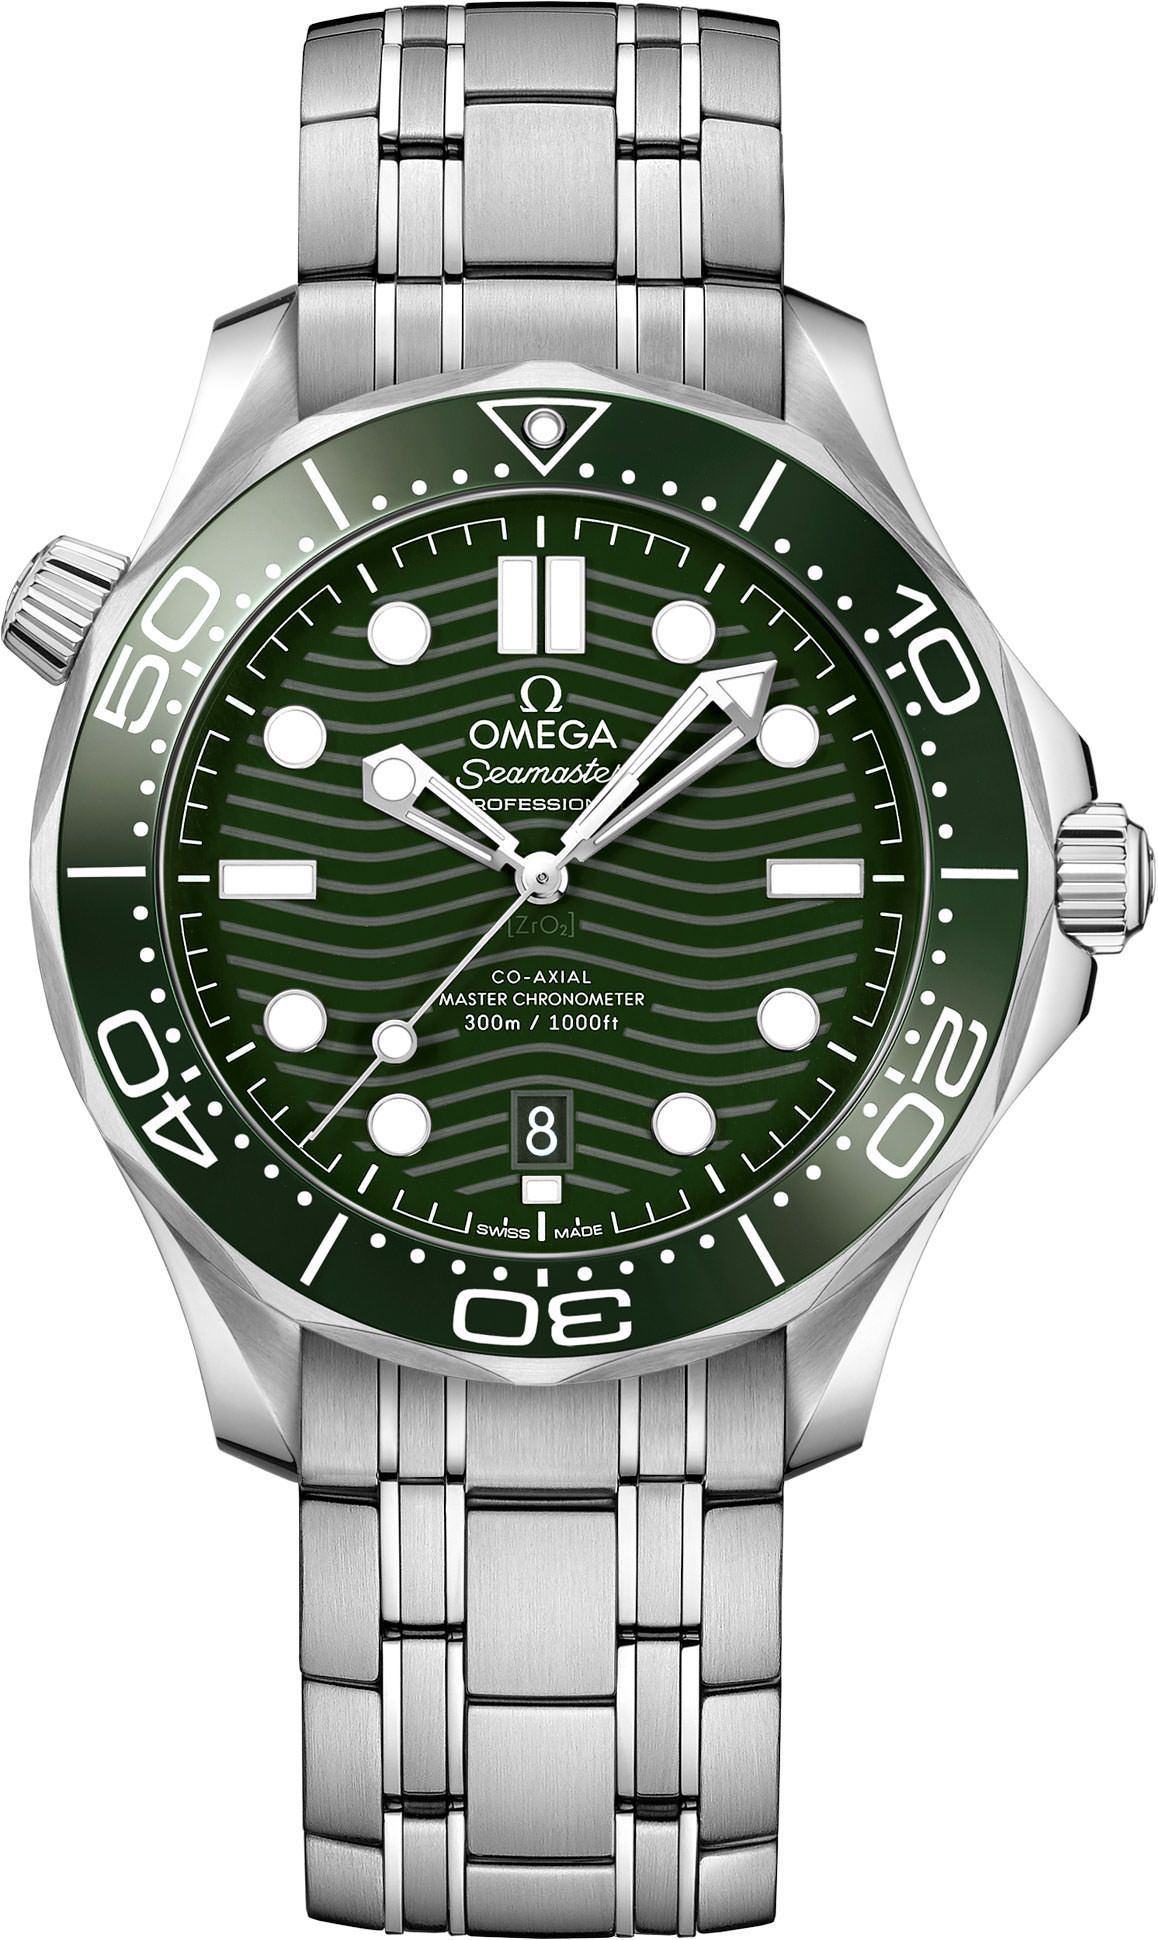 Omega Seamaster Diver 300M Green Dial 42 mm Automatic Watch For Men - 1